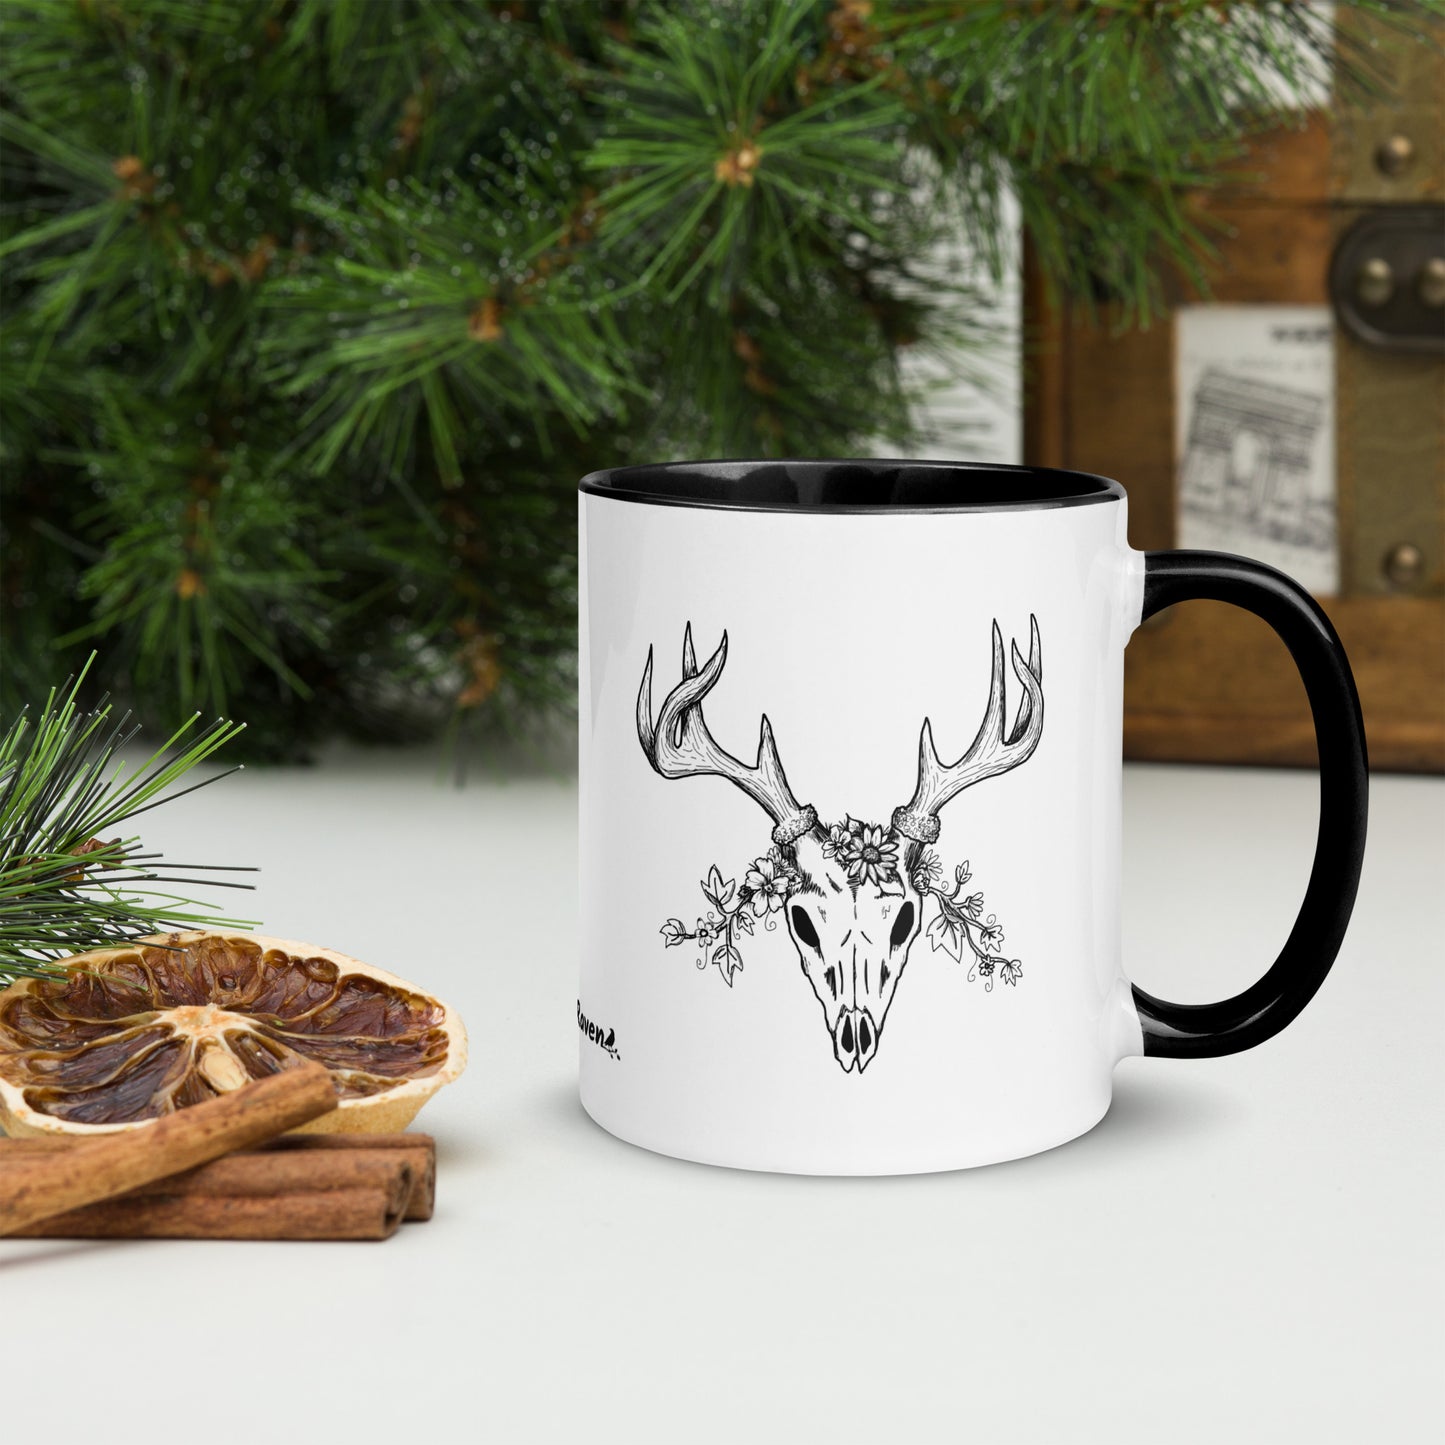 11 ounce ceramic mug with hand illustrated deer skull wreathed in flowers. Double-sided design. Mug has black rim, handle, and inside. Shown sitting on a tabletop by pine branches, cinnamon sticks, and dried orange slice.